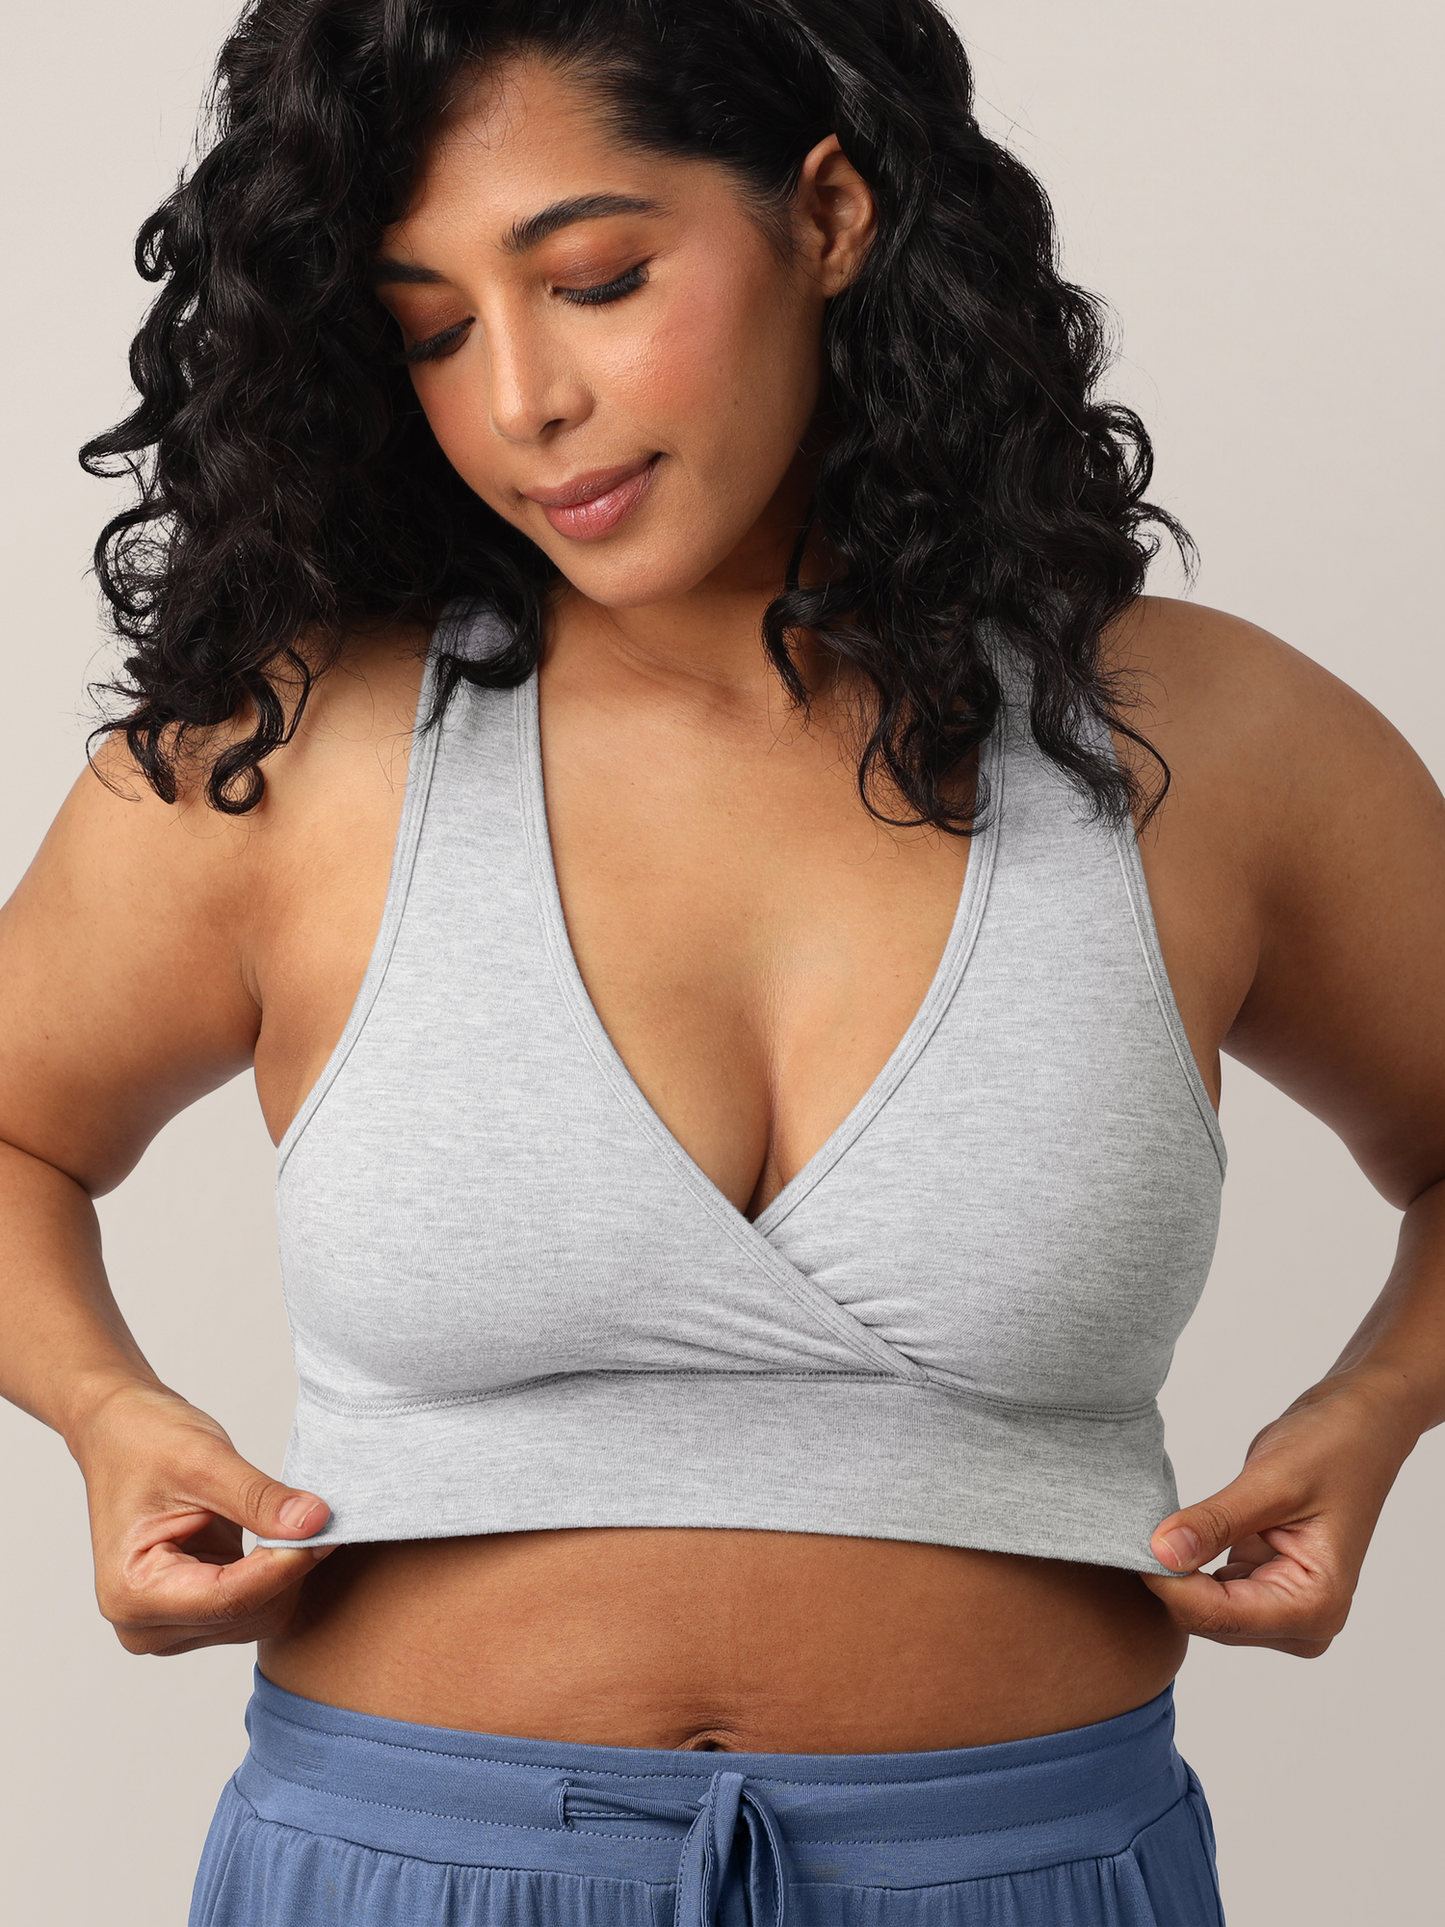 Model wearing French Terry Nursing Bra in Grey and showing the stretch of the waistband.